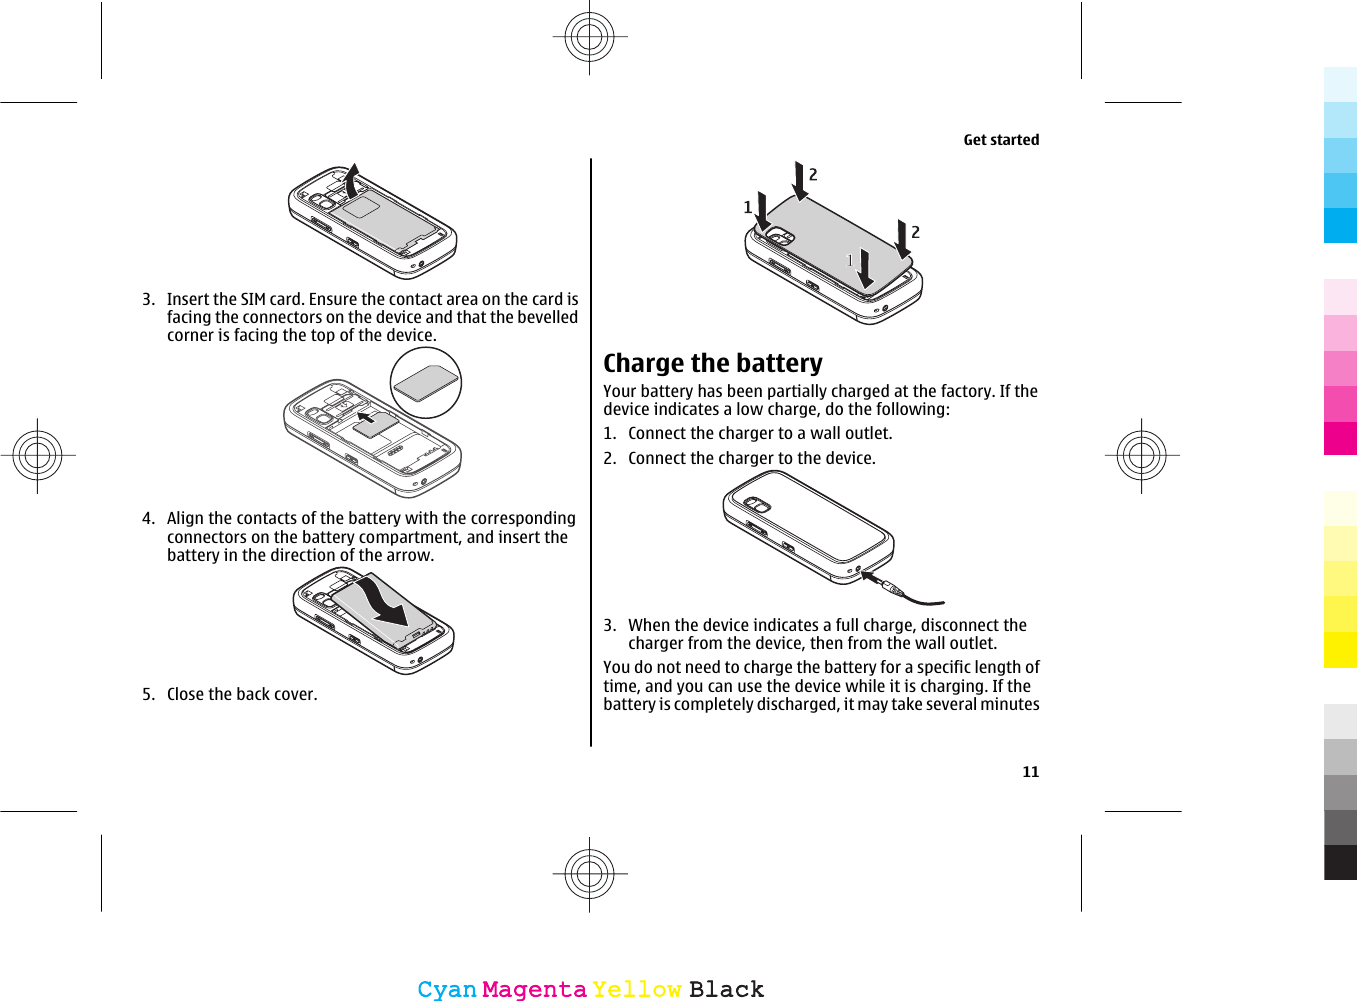 3. Insert the SIM card. Ensure the contact area on the card isfacing the connectors on the device and that the bevelledcorner is facing the top of the device.4. Align the contacts of the battery with the correspondingconnectors on the battery compartment, and insert thebattery in the direction of the arrow.5. Close the back cover.Charge the batteryYour battery has been partially charged at the factory. If thedevice indicates a low charge, do the following:1. Connect the charger to a wall outlet.2. Connect the charger to the device.3. When the device indicates a full charge, disconnect thecharger from the device, then from the wall outlet.You do not need to charge the battery for a specific length oftime, and you can use the device while it is charging. If thebattery is completely discharged, it may take several minutesGet started11CyanCyanMagentaMagentaYellowYellowBlackBlack